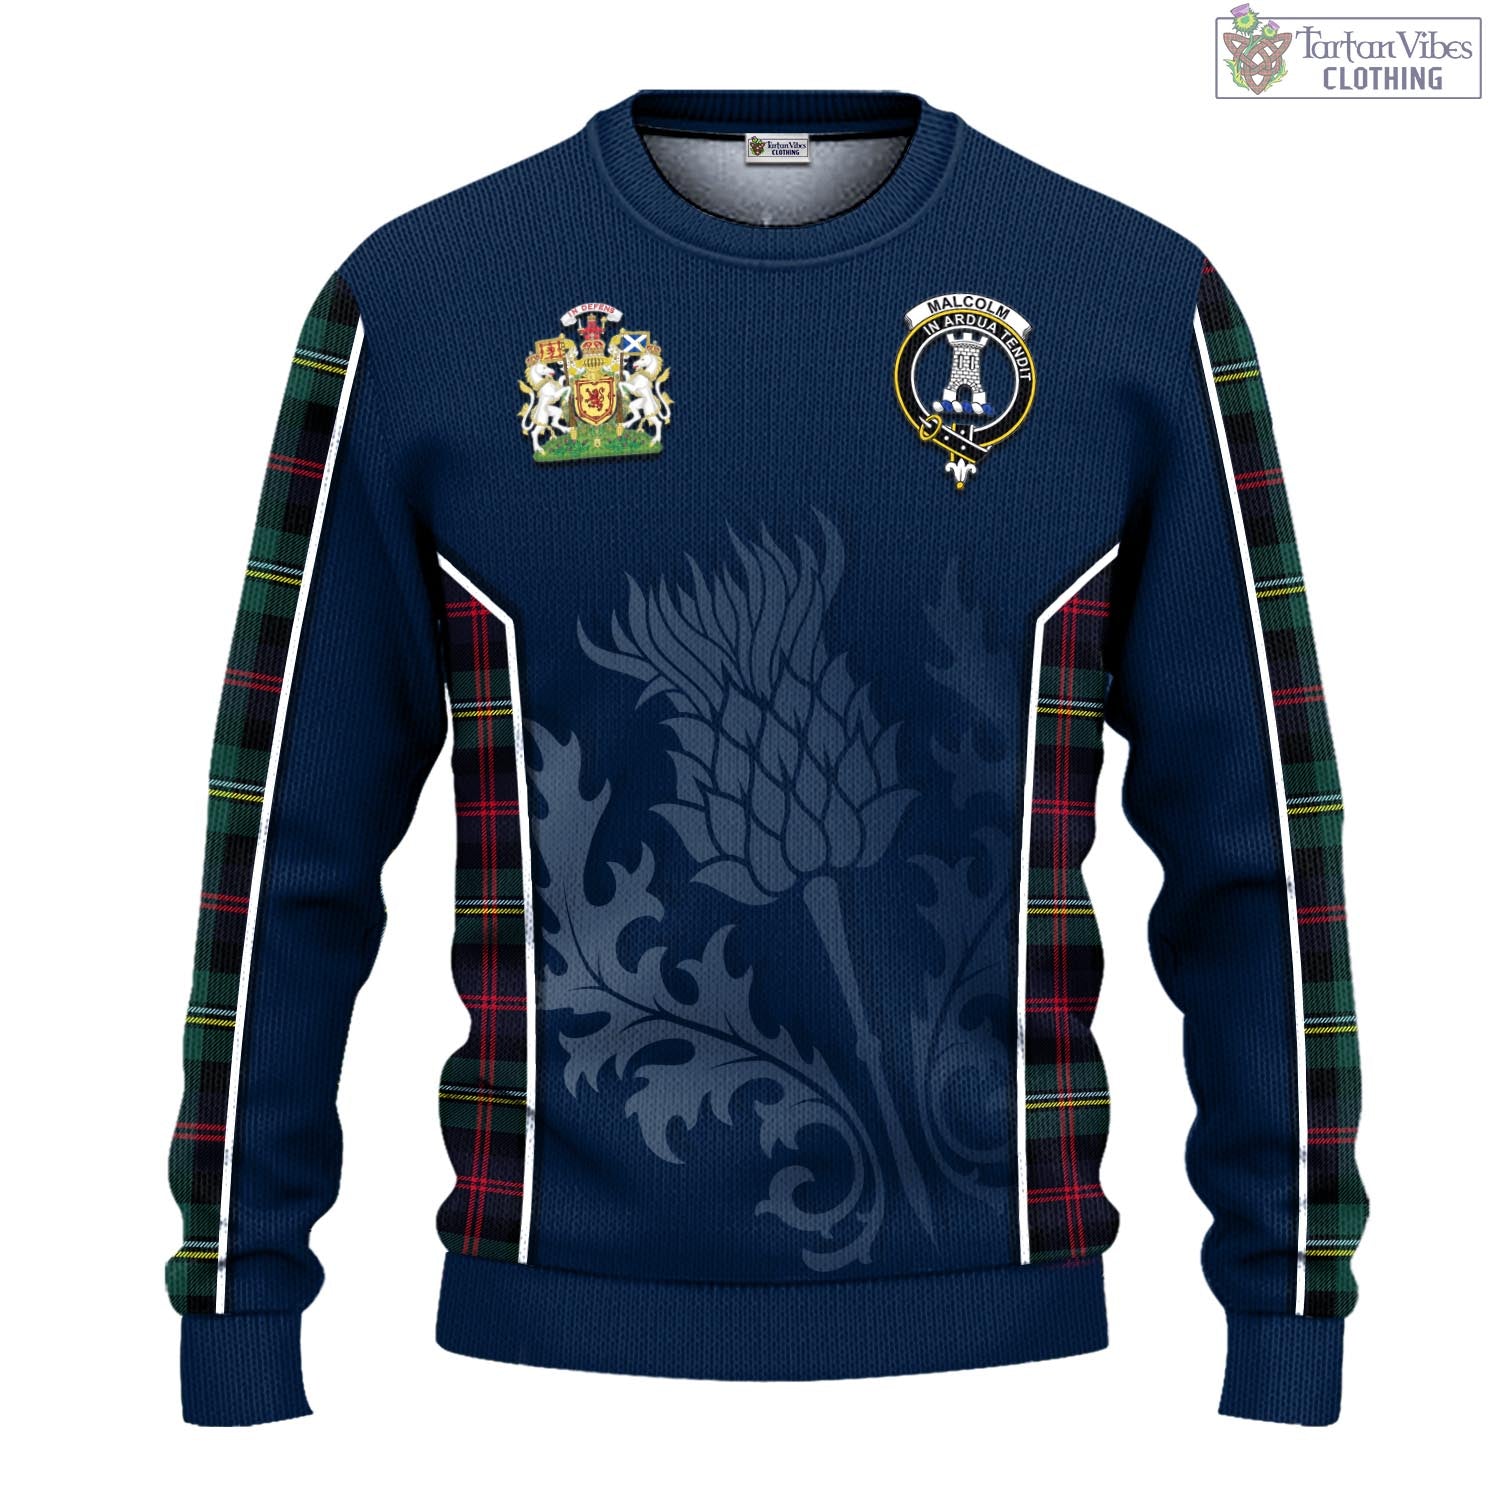 Tartan Vibes Clothing Malcolm Modern Tartan Knitted Sweatshirt with Family Crest and Scottish Thistle Vibes Sport Style